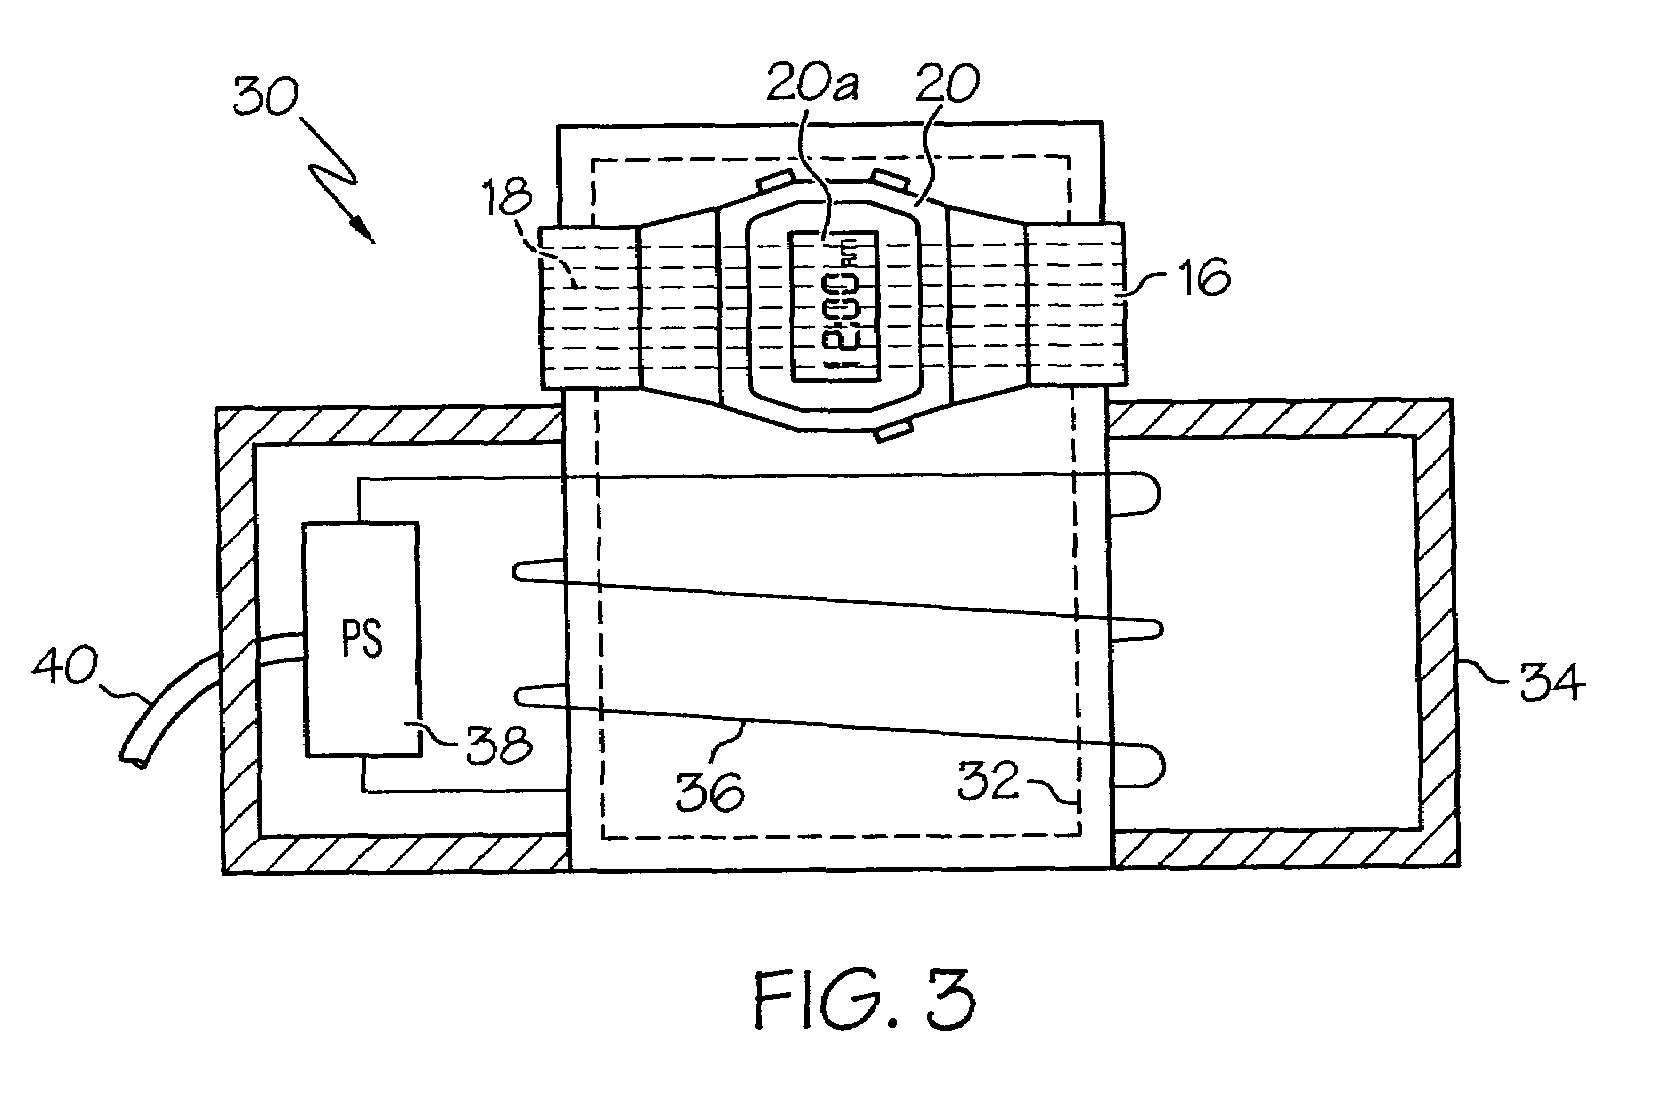 Wristband reader apparatus for human-implanted radio frequency identification device